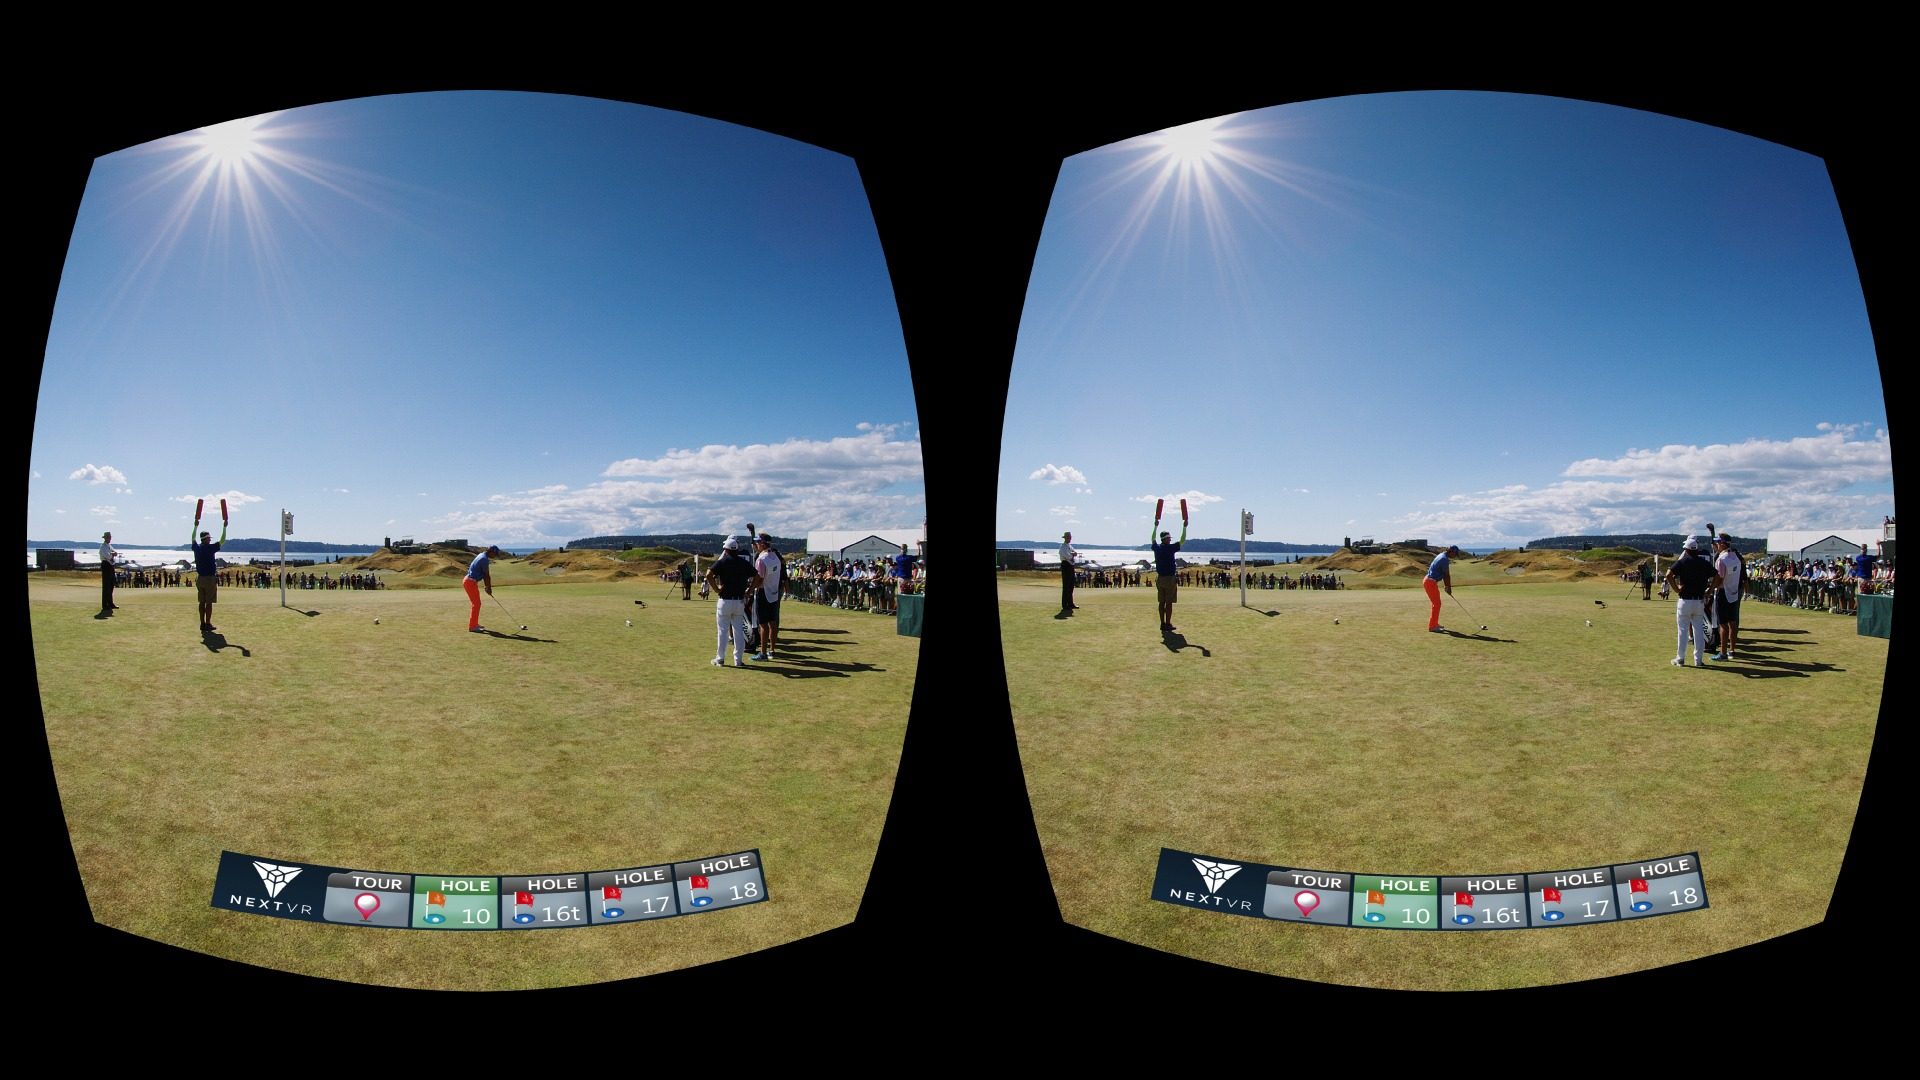 NextVR Livestreams US Open Golf Tournament in VR, App Coming to 1920 x 1080